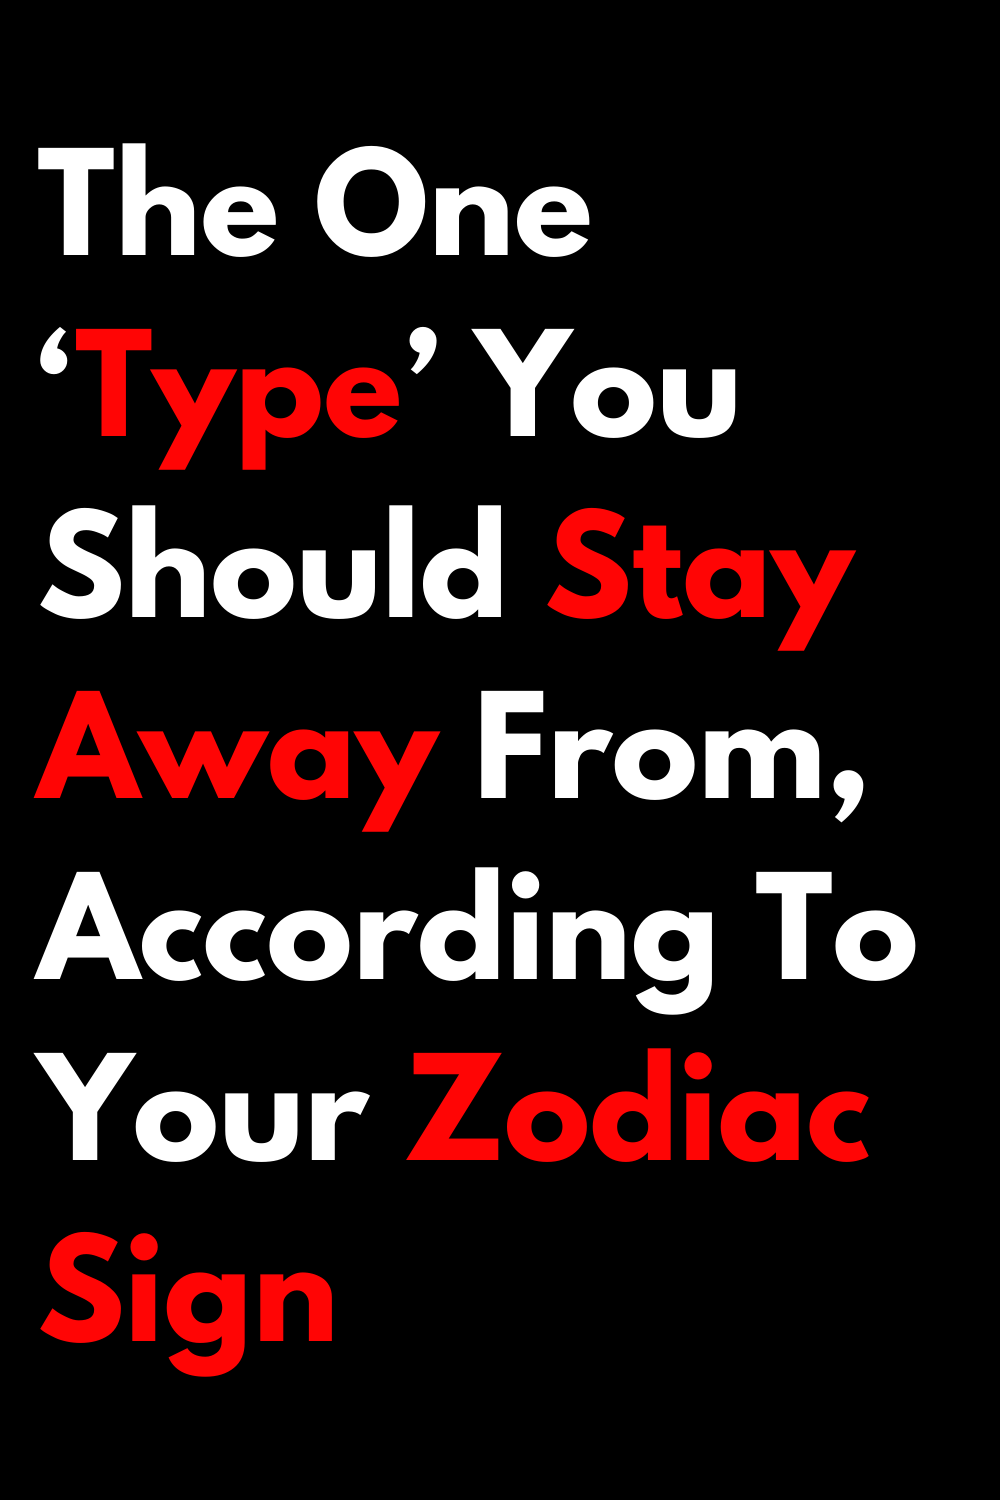 The One ‘Type’ You Should Stay Away From, According To Your Zodiac Sign